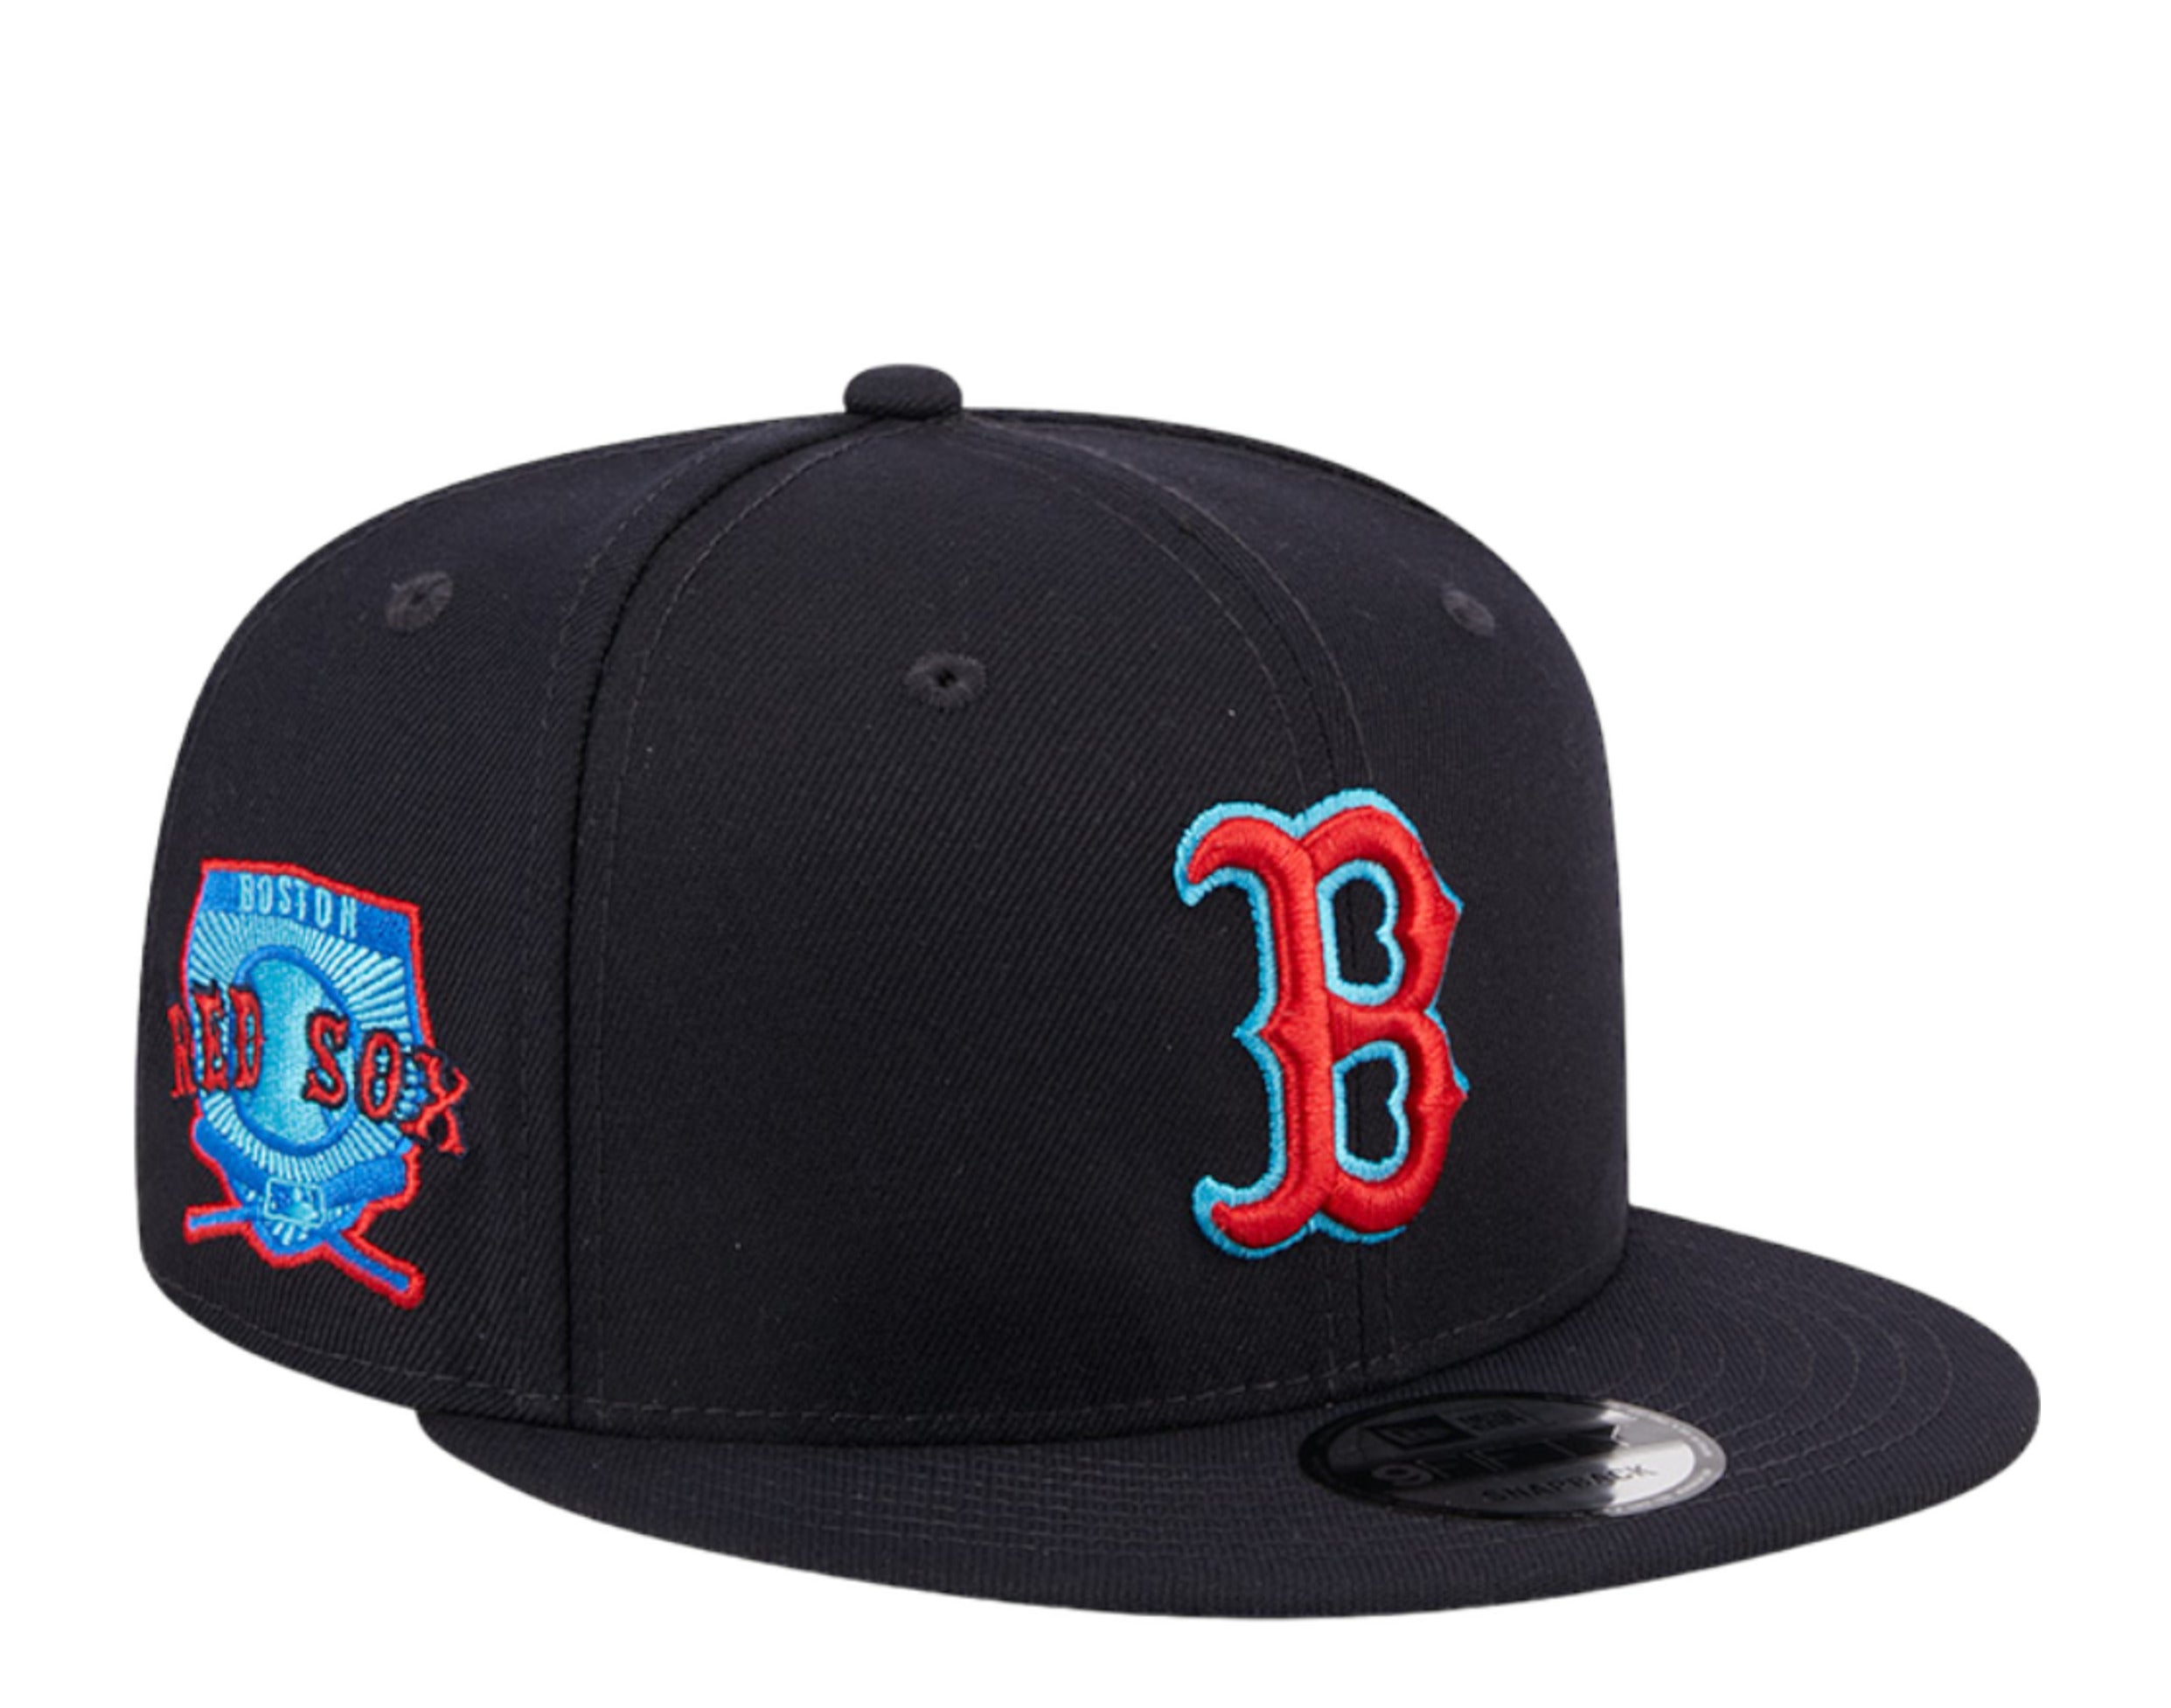 Boston Red Sox Black Friday Deals, Clearance Red Sox Adjustable Caps,  Discounted Red Sox Adjustable Caps